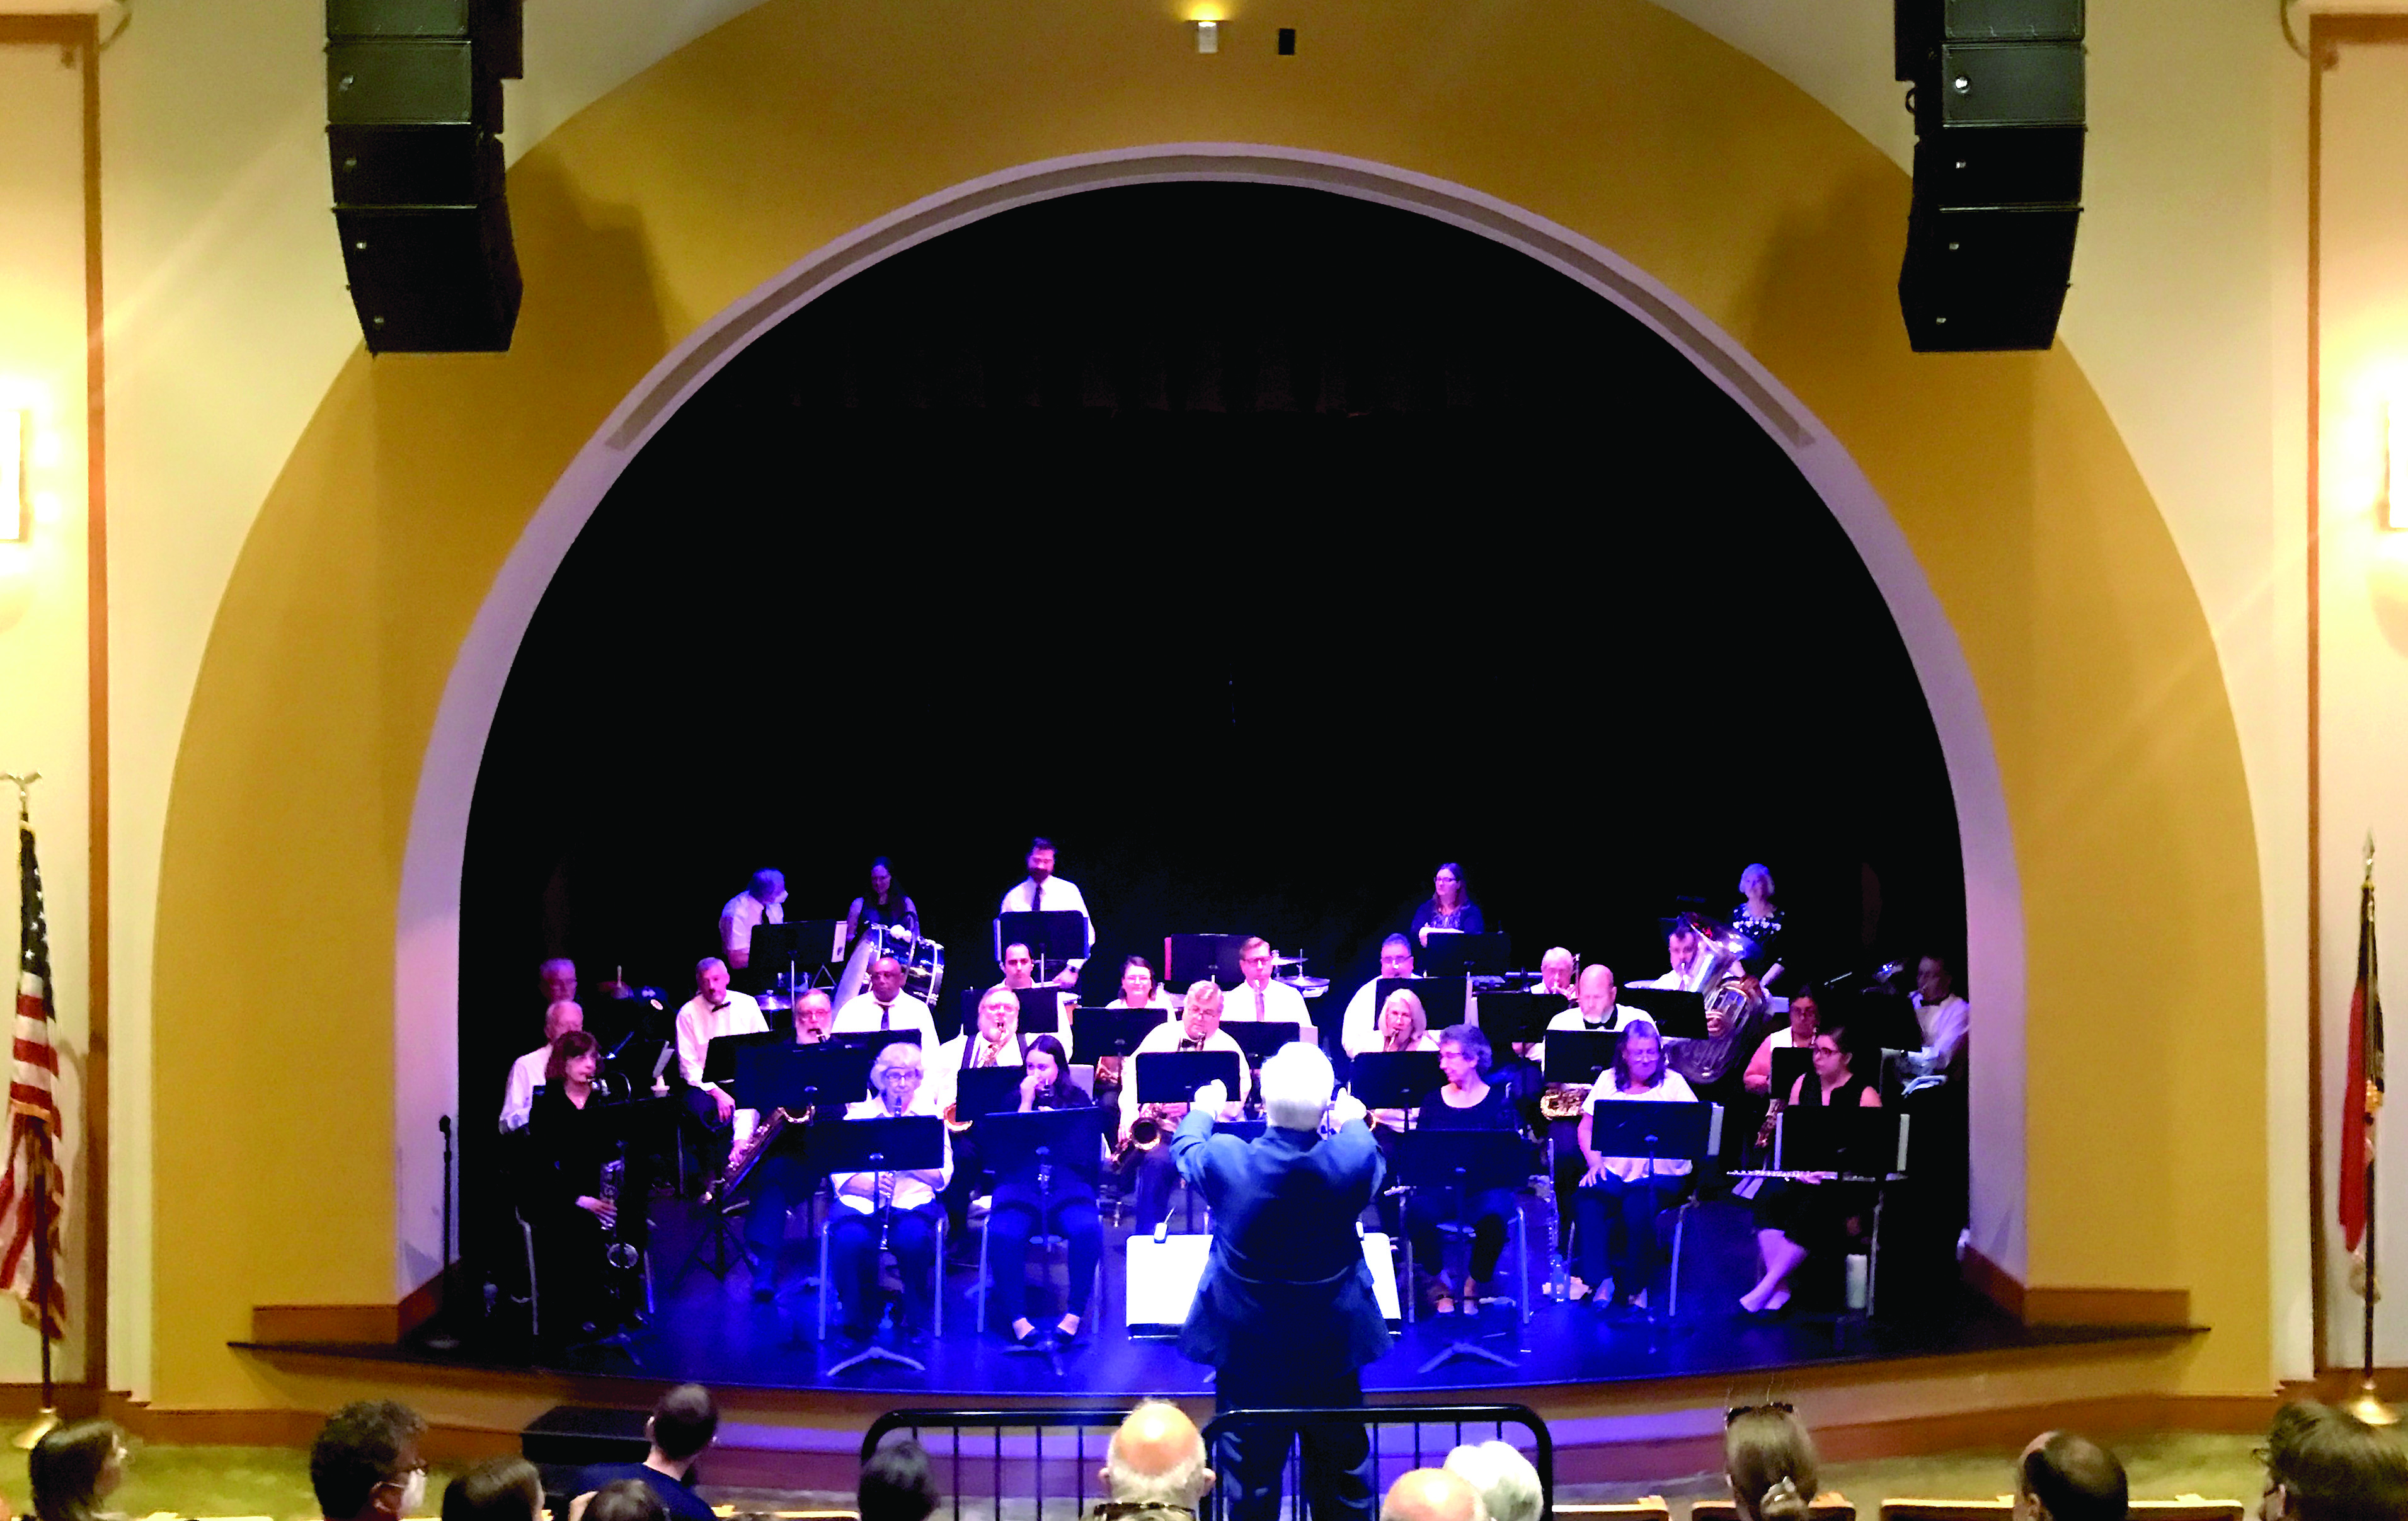 A True Community Band Featuring Musicians  from Our Town   By Roberta Clayton